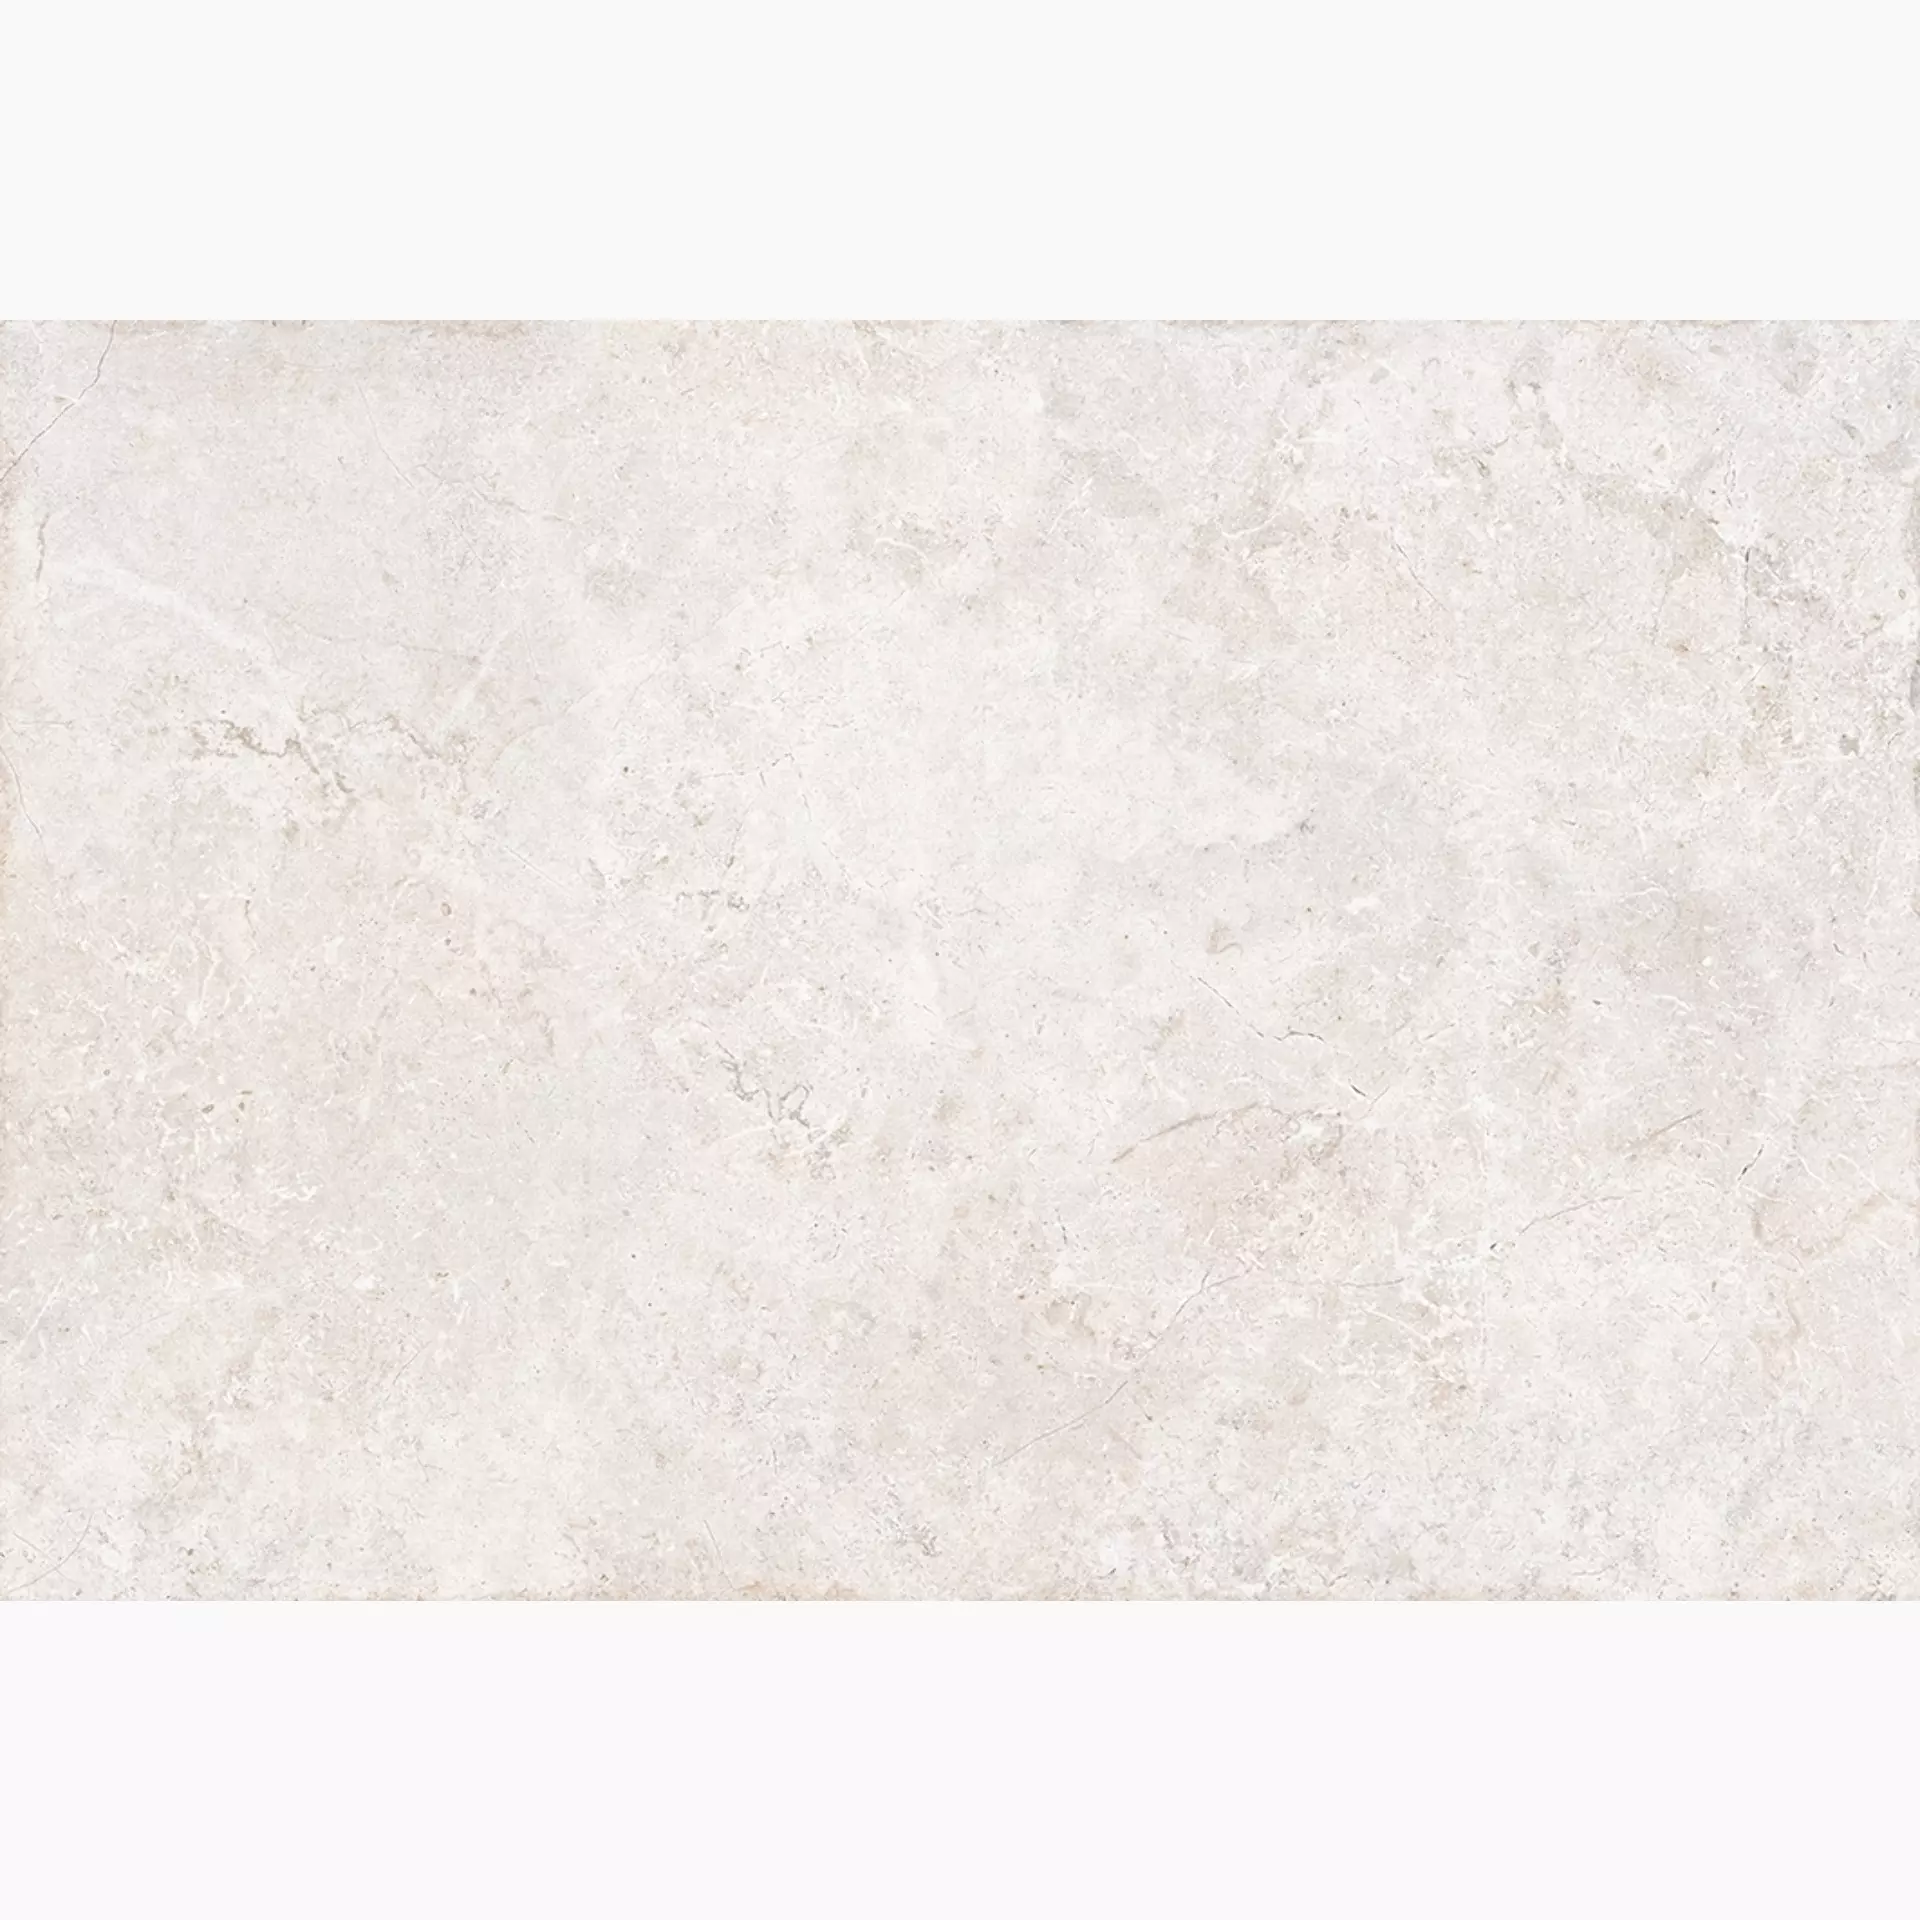 Sichenia Amboise Bianco Smooth Chipped Edge 0192641 60x90cm rectified 10mm